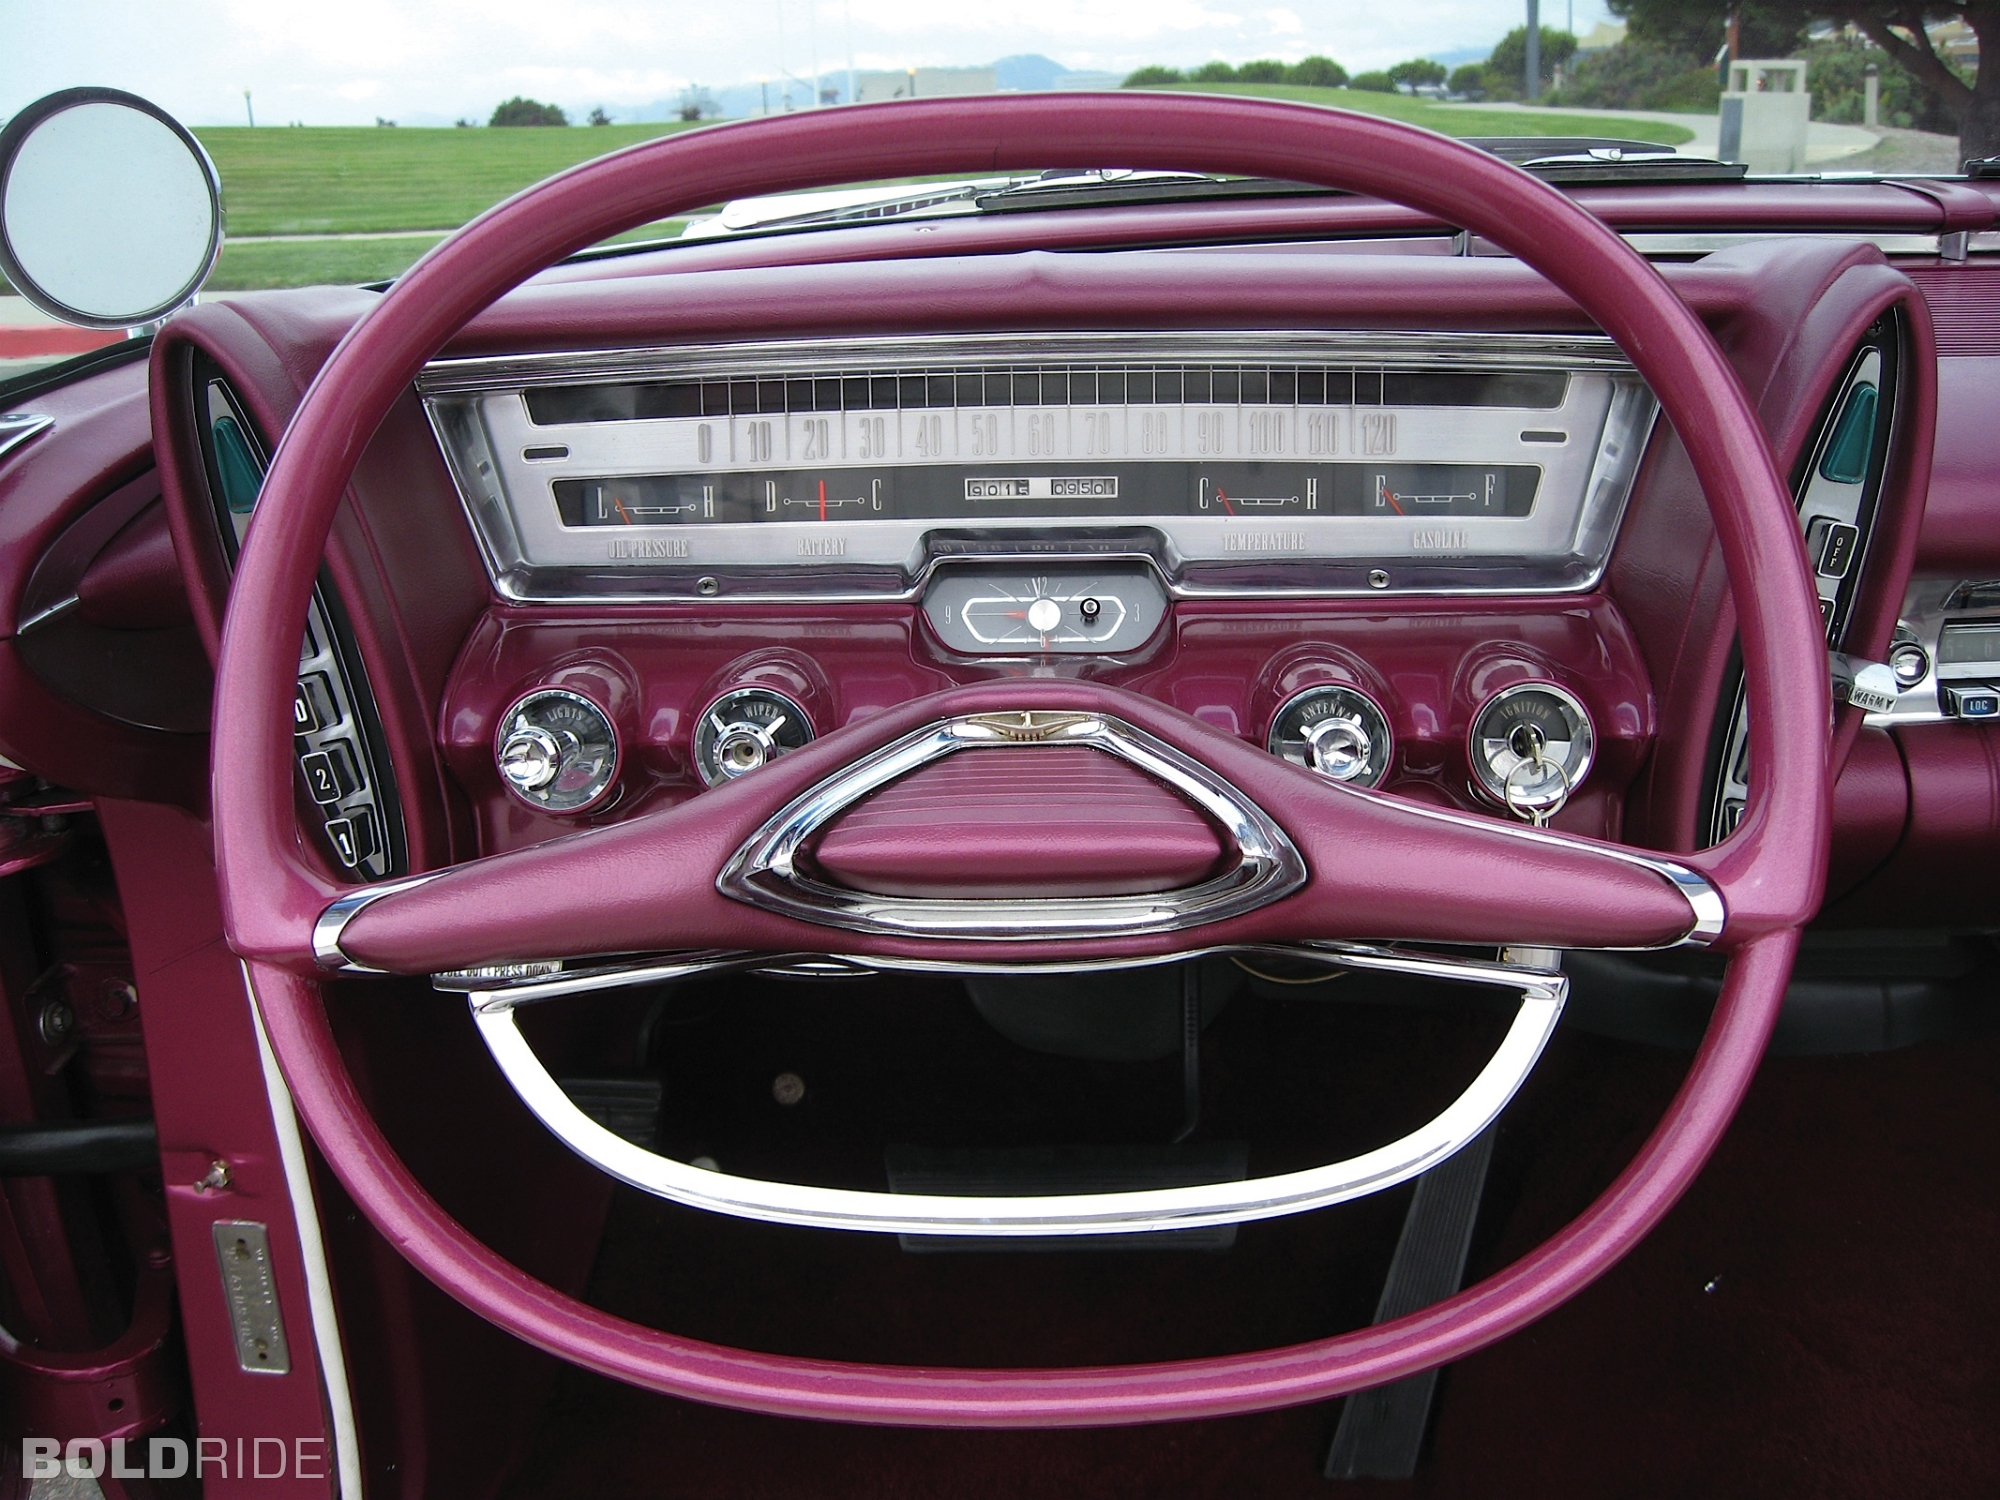 1961 Chrysler Imperial Crown Convertible Boldride.com - Pictures ...